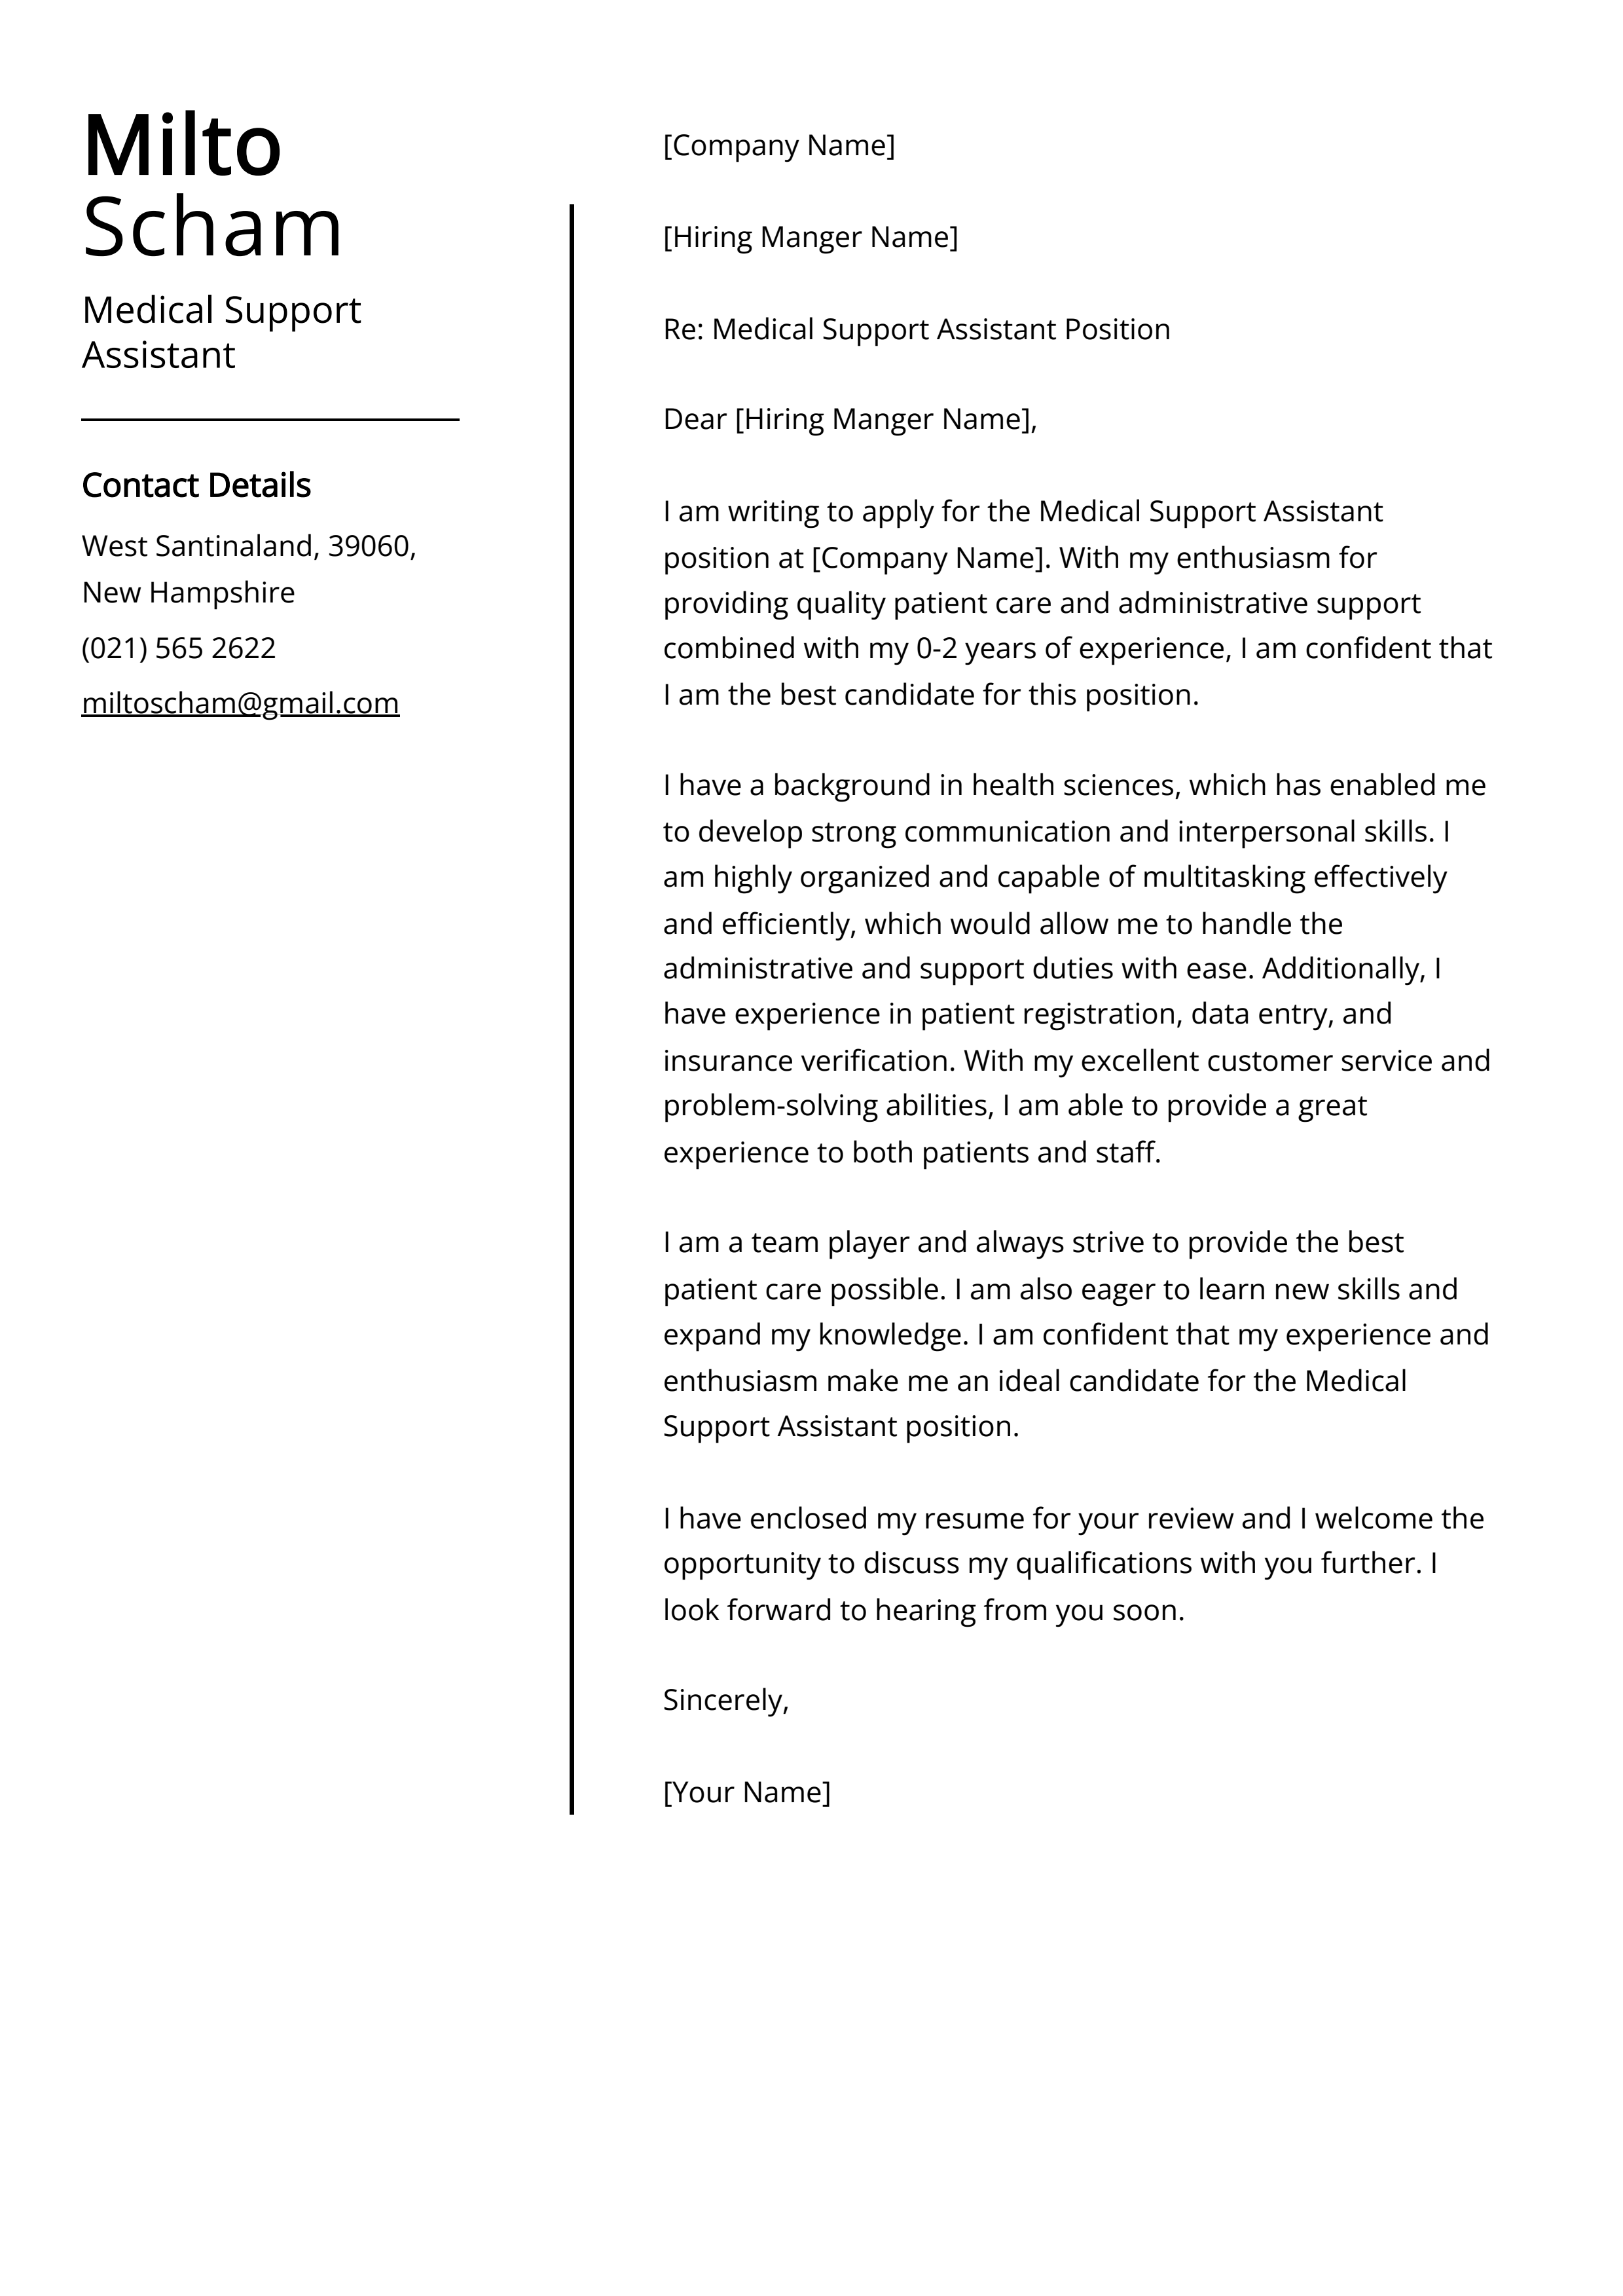 Medical Support Assistant Cover Letter Example